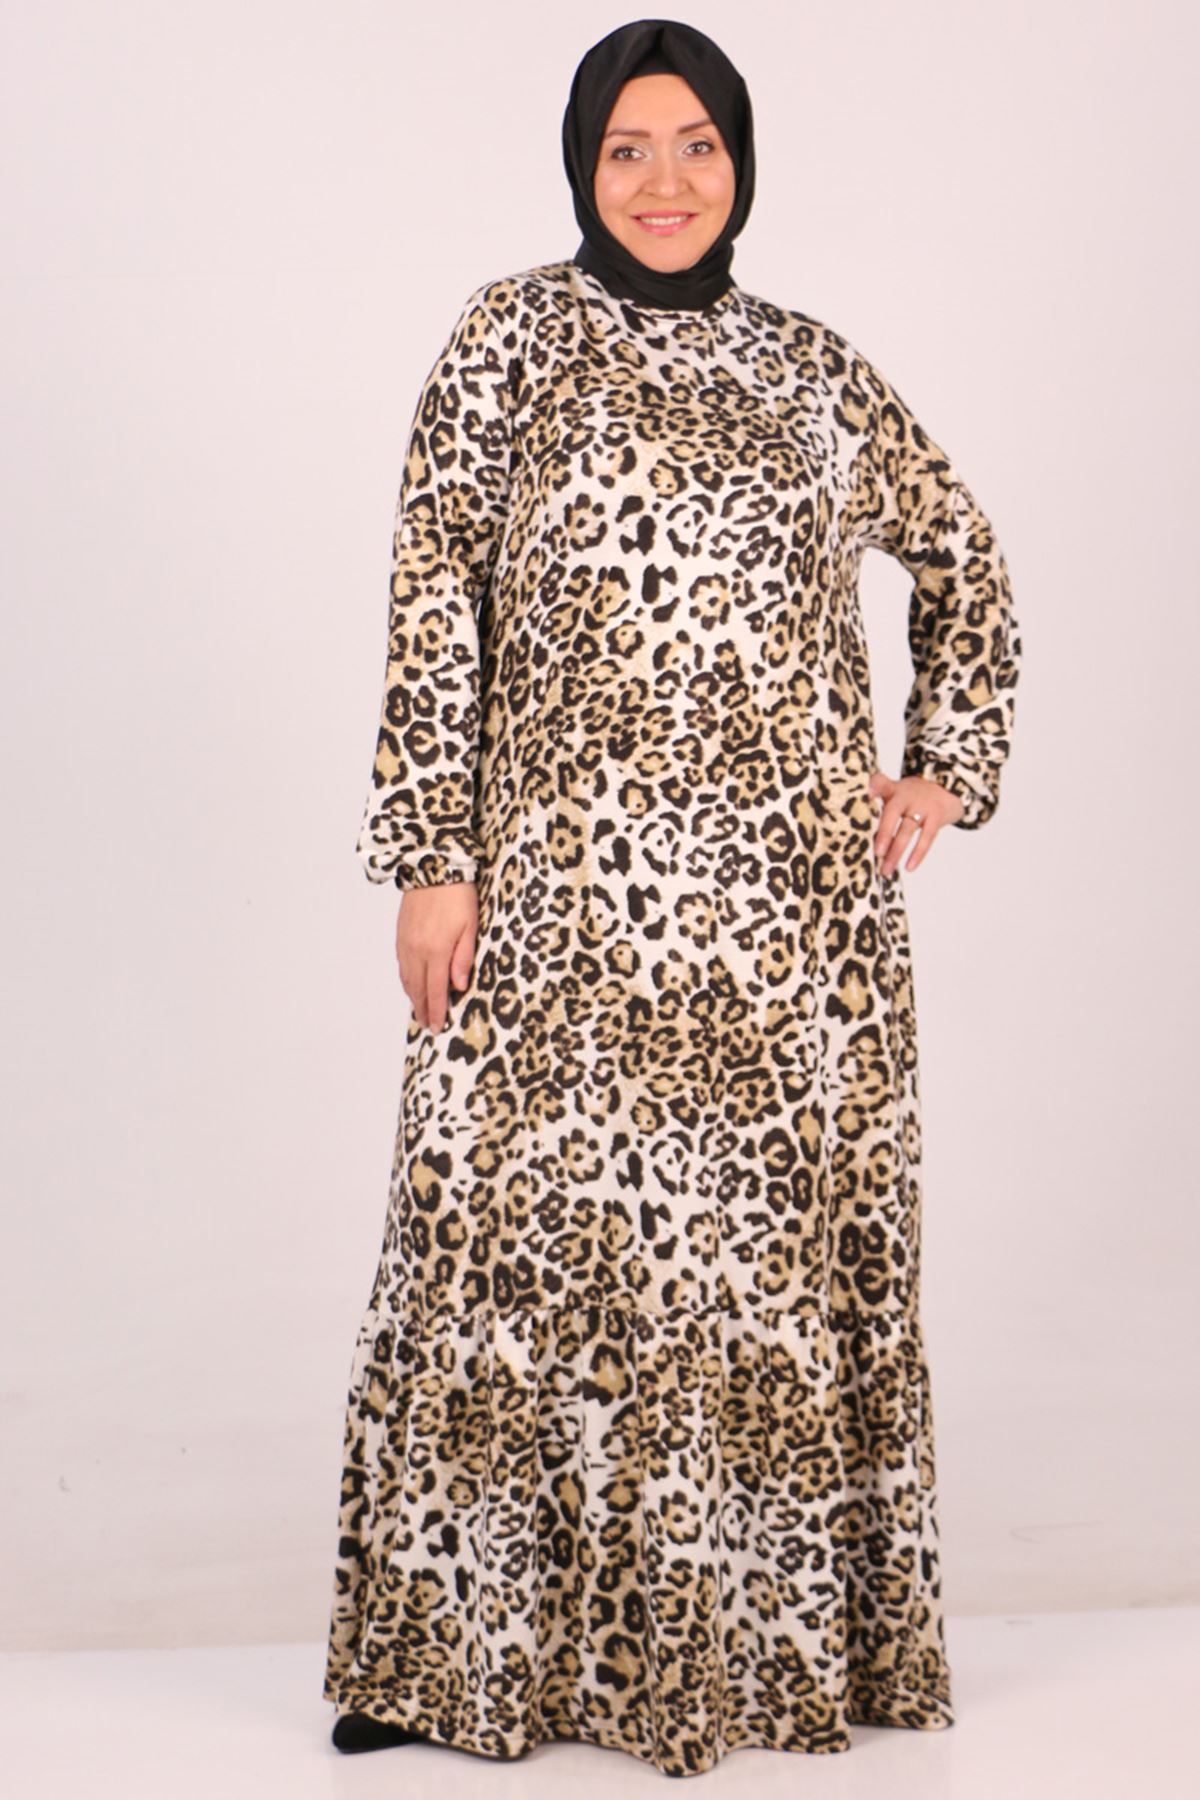 42007 Plus Size Crystal Dress with Frilly Skirt-Leopard